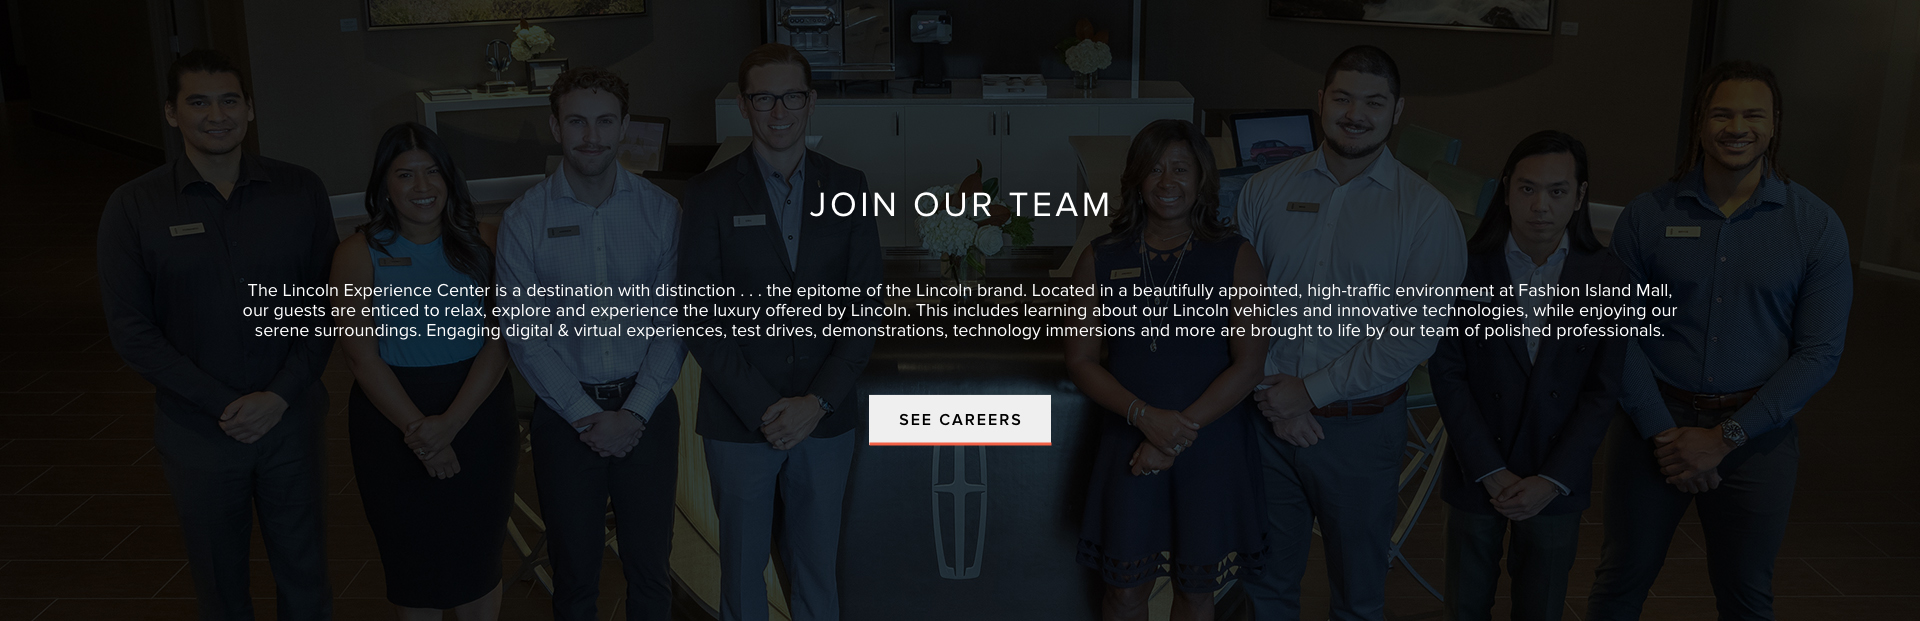 Join Our Team. Click here to see career opportunities at the Lincoln Experience Center.